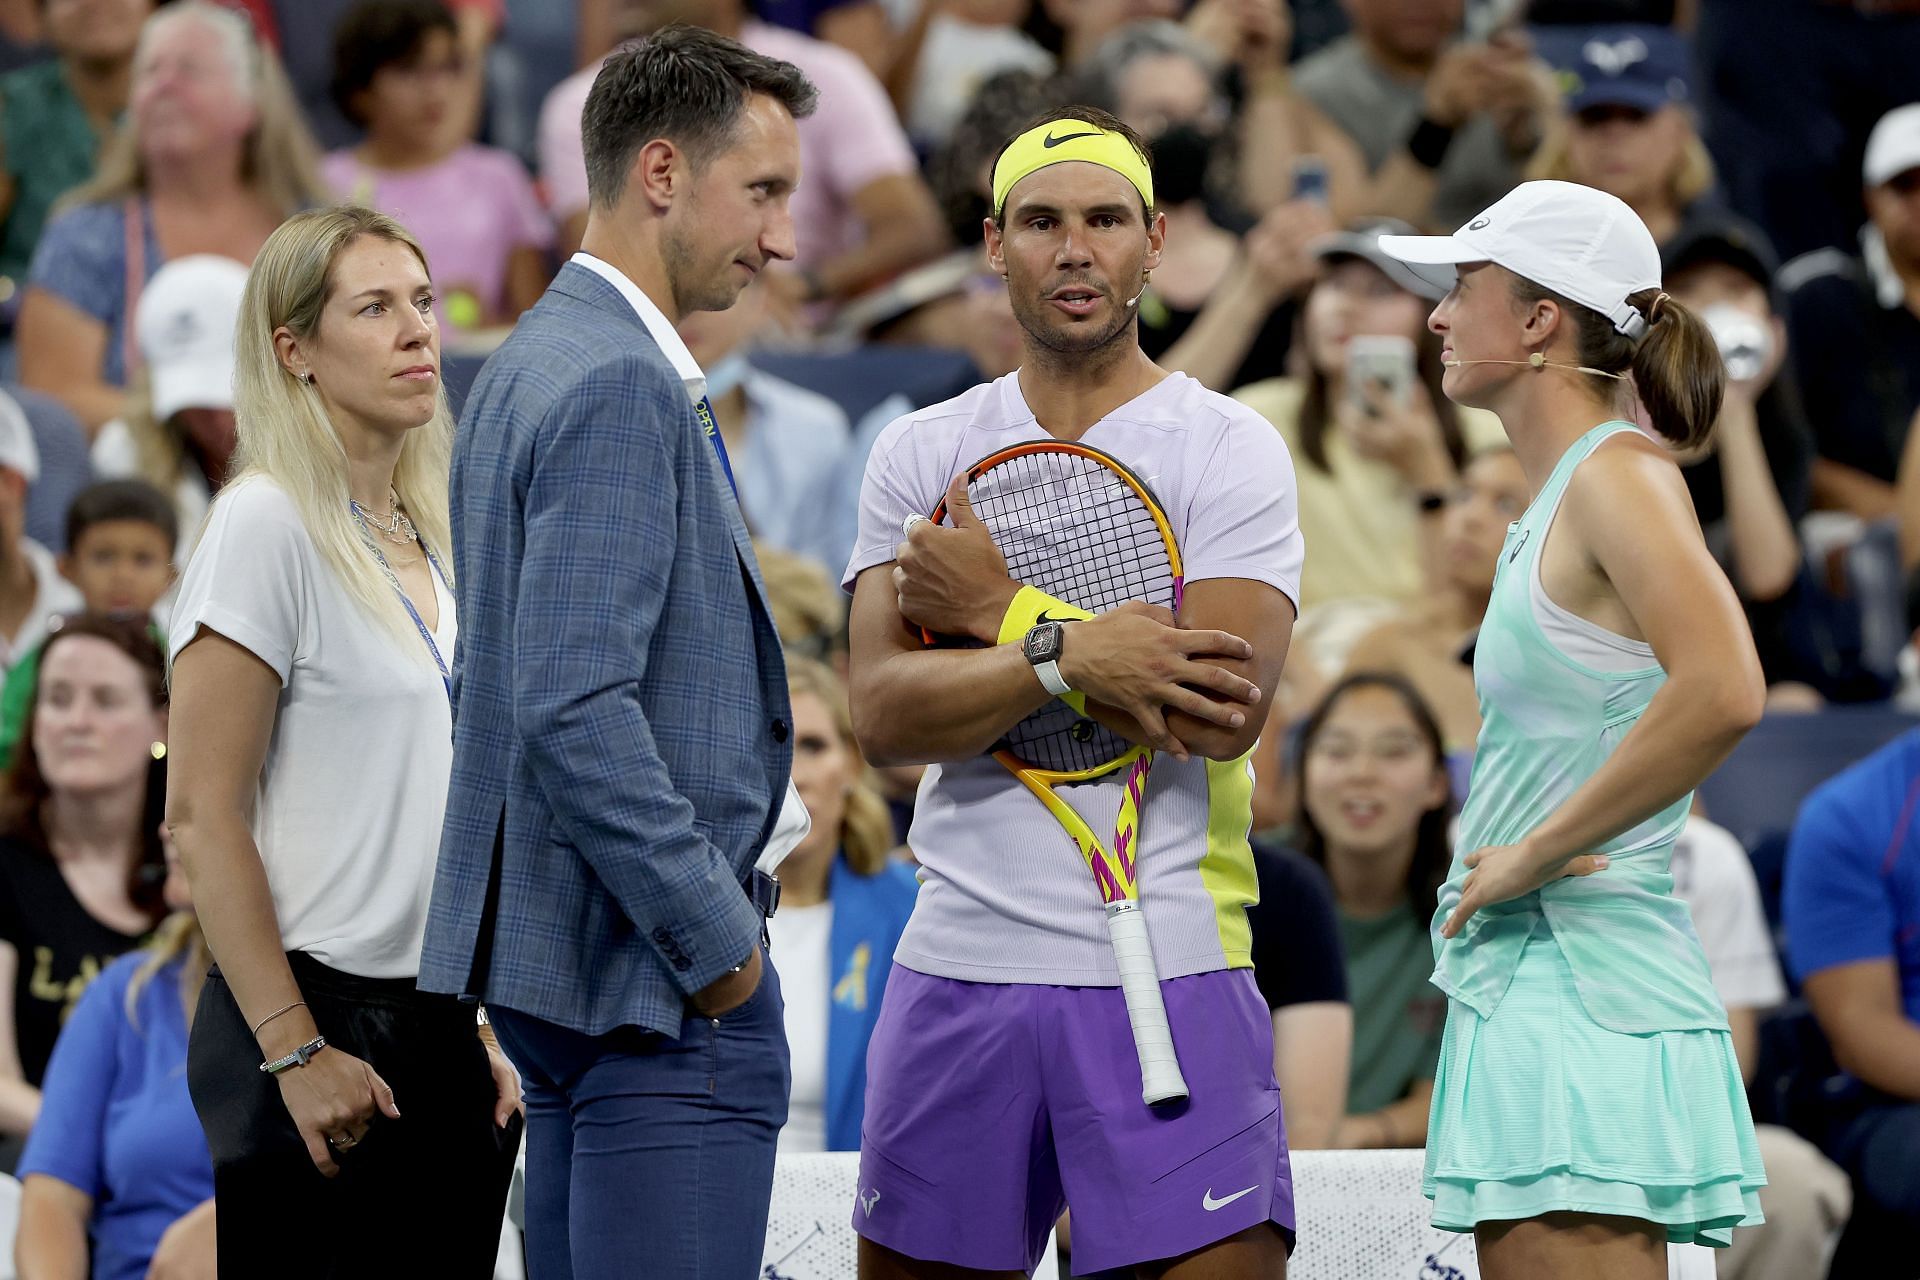 Rafael Nadal and Iga Swiatek speak with former players Olga Savchuk (leftmost) and Sergiy Stakhovsky (second from left) during the US Open&#039;s Tennis Plays for Peace charity event.